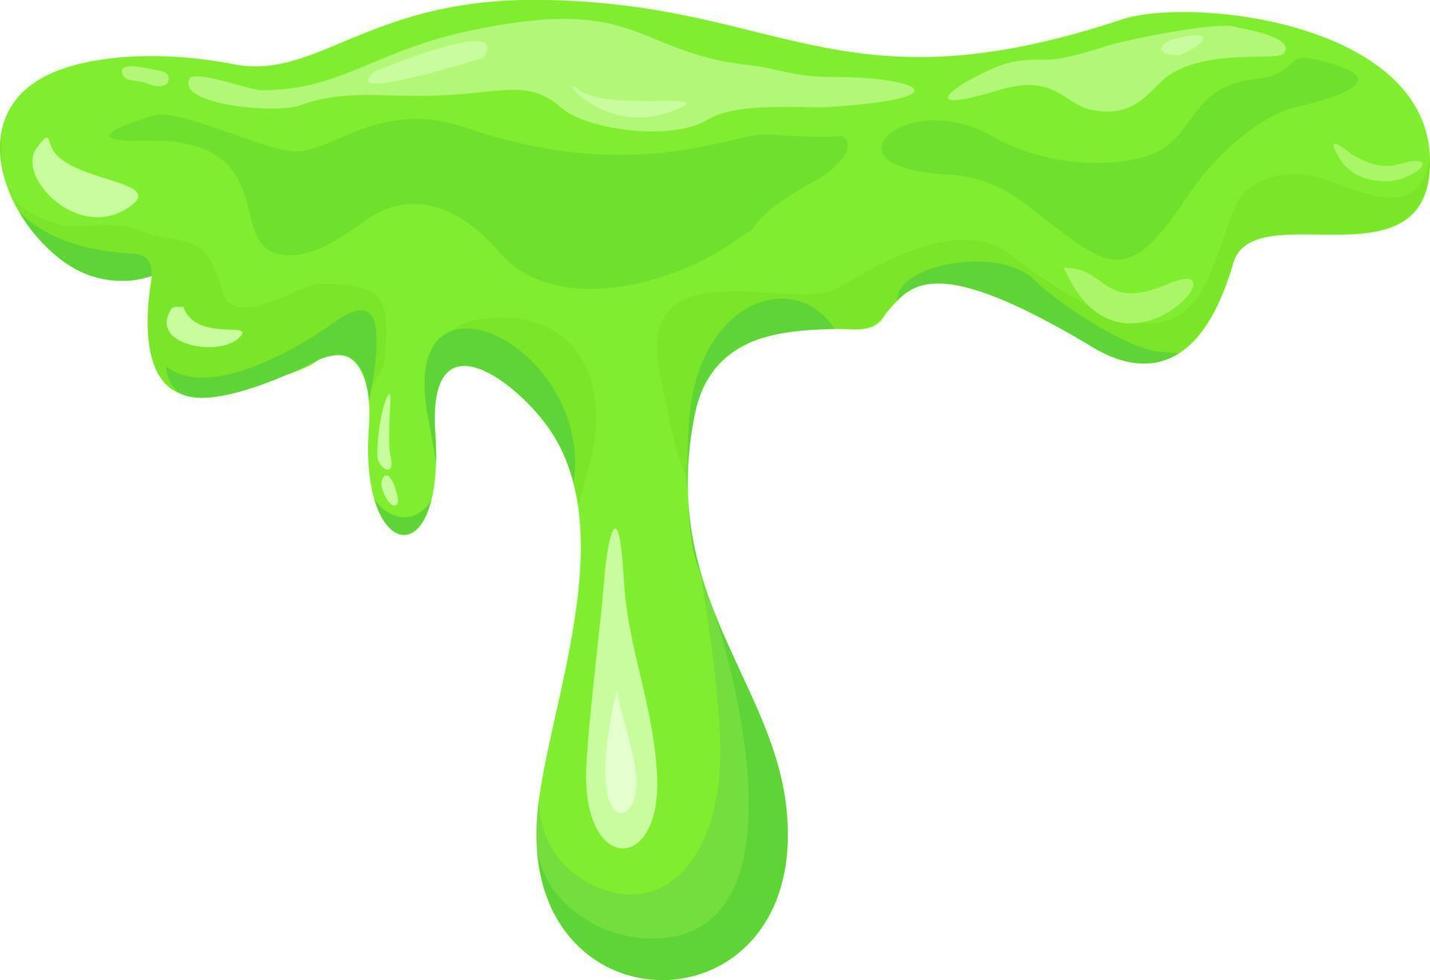 Slime splashes. Realistic green slime. Graphic concept for your design vector